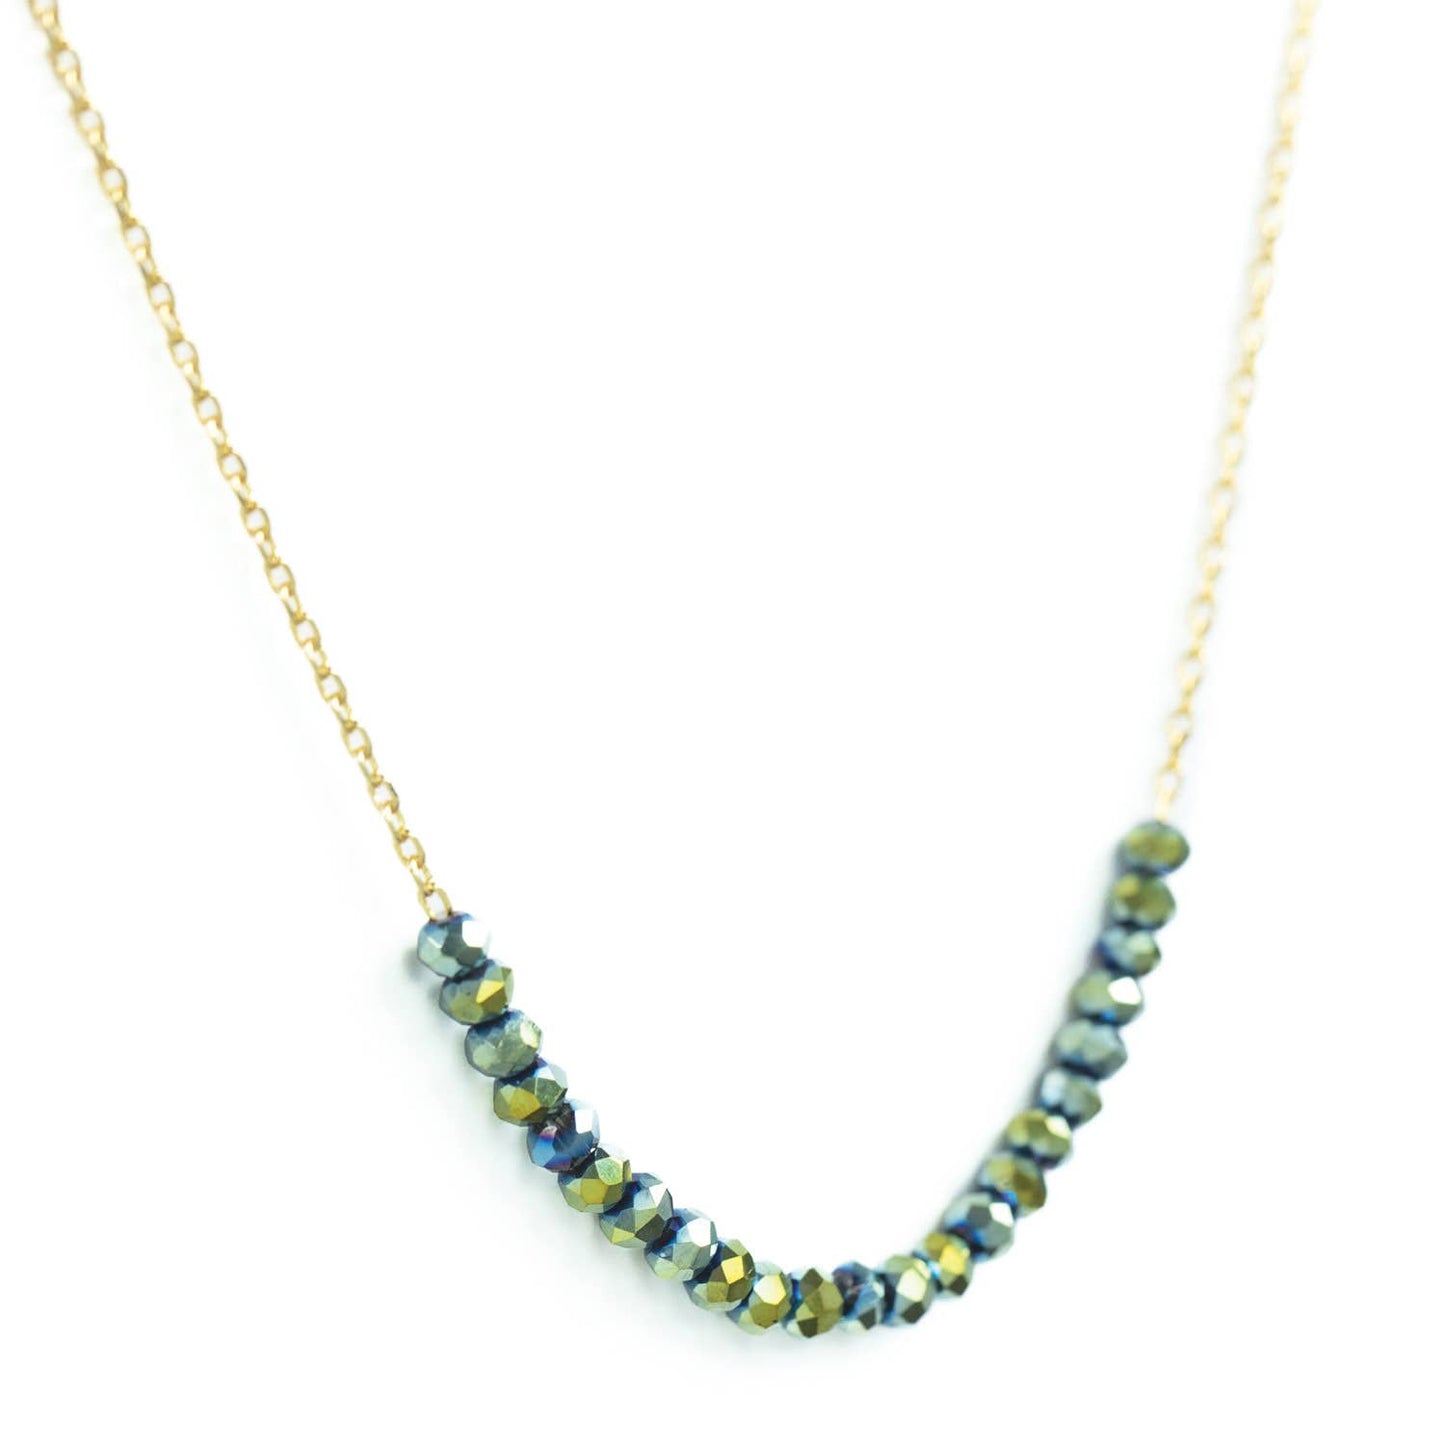 Splendid Iris - Delicate Crystal Accented Necklace: Navy